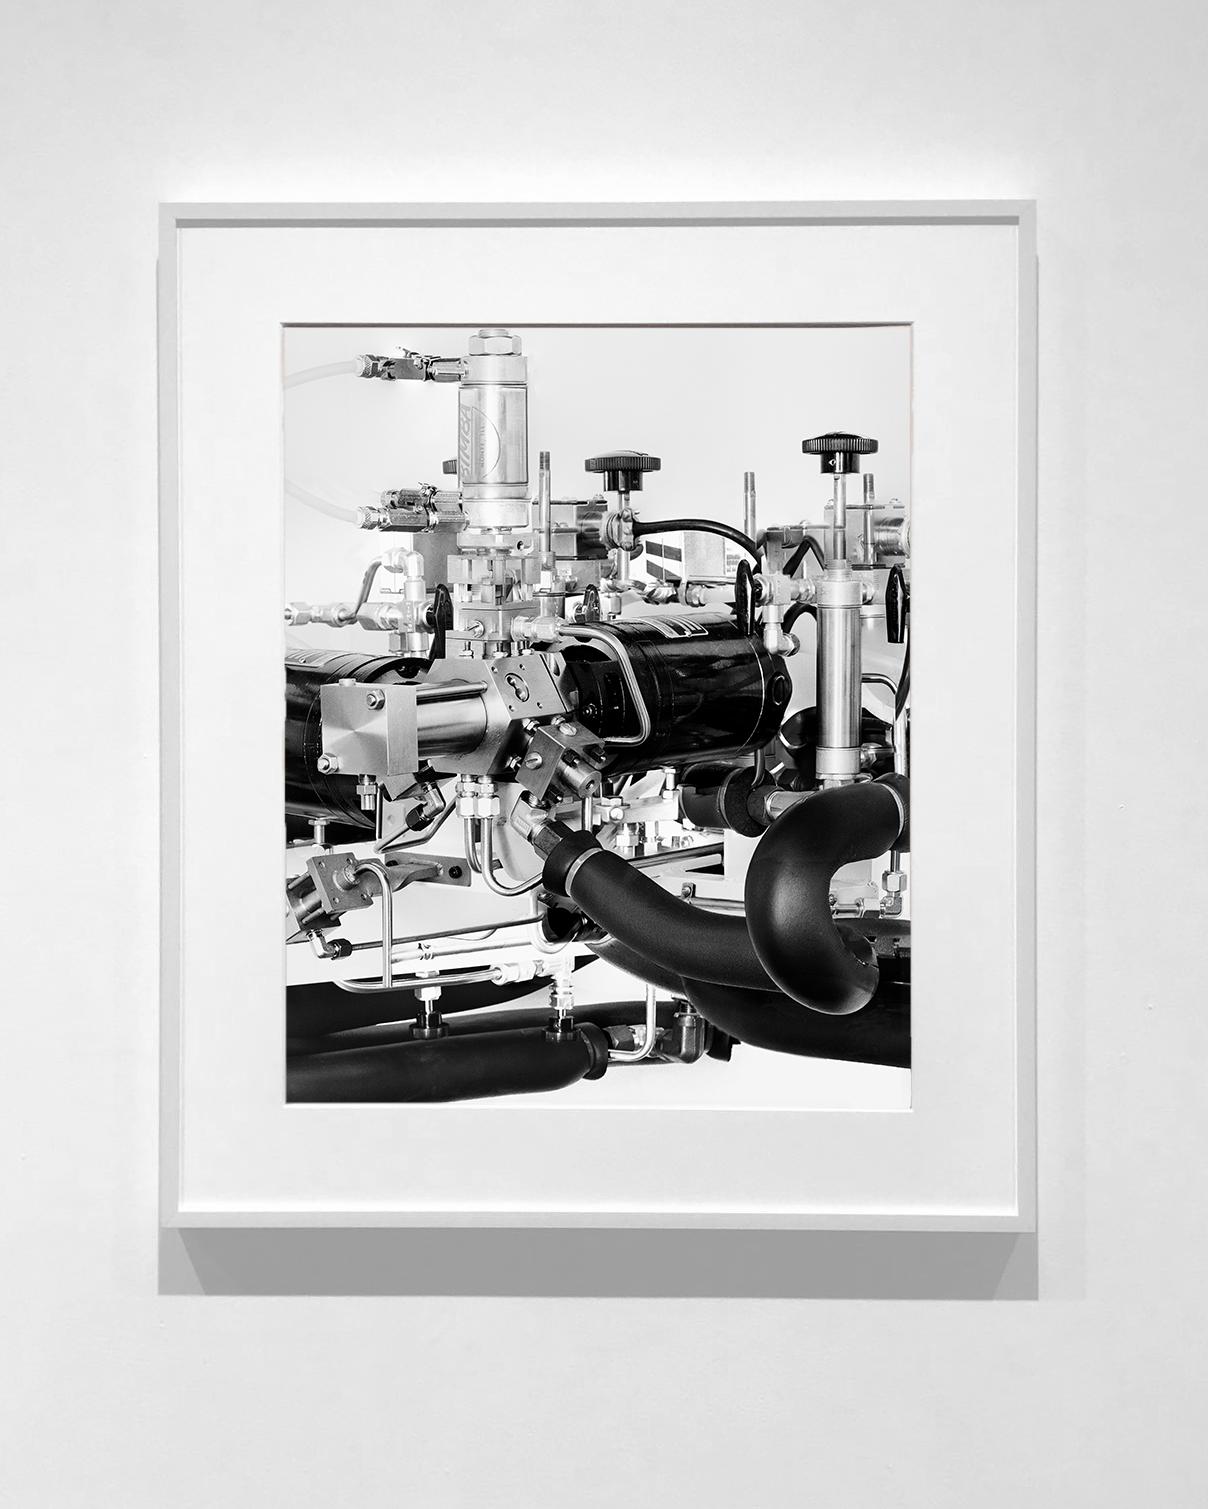 General Information:
New Technic #1, 2020
30 x 24 Inches
Edition 1/10
Print only. Contact seller for framing options. 
Produced on Hahnemühle Fine Art Paper. 
Printed to order to ensure museum quality and prevent any damage.
A Signature Label with